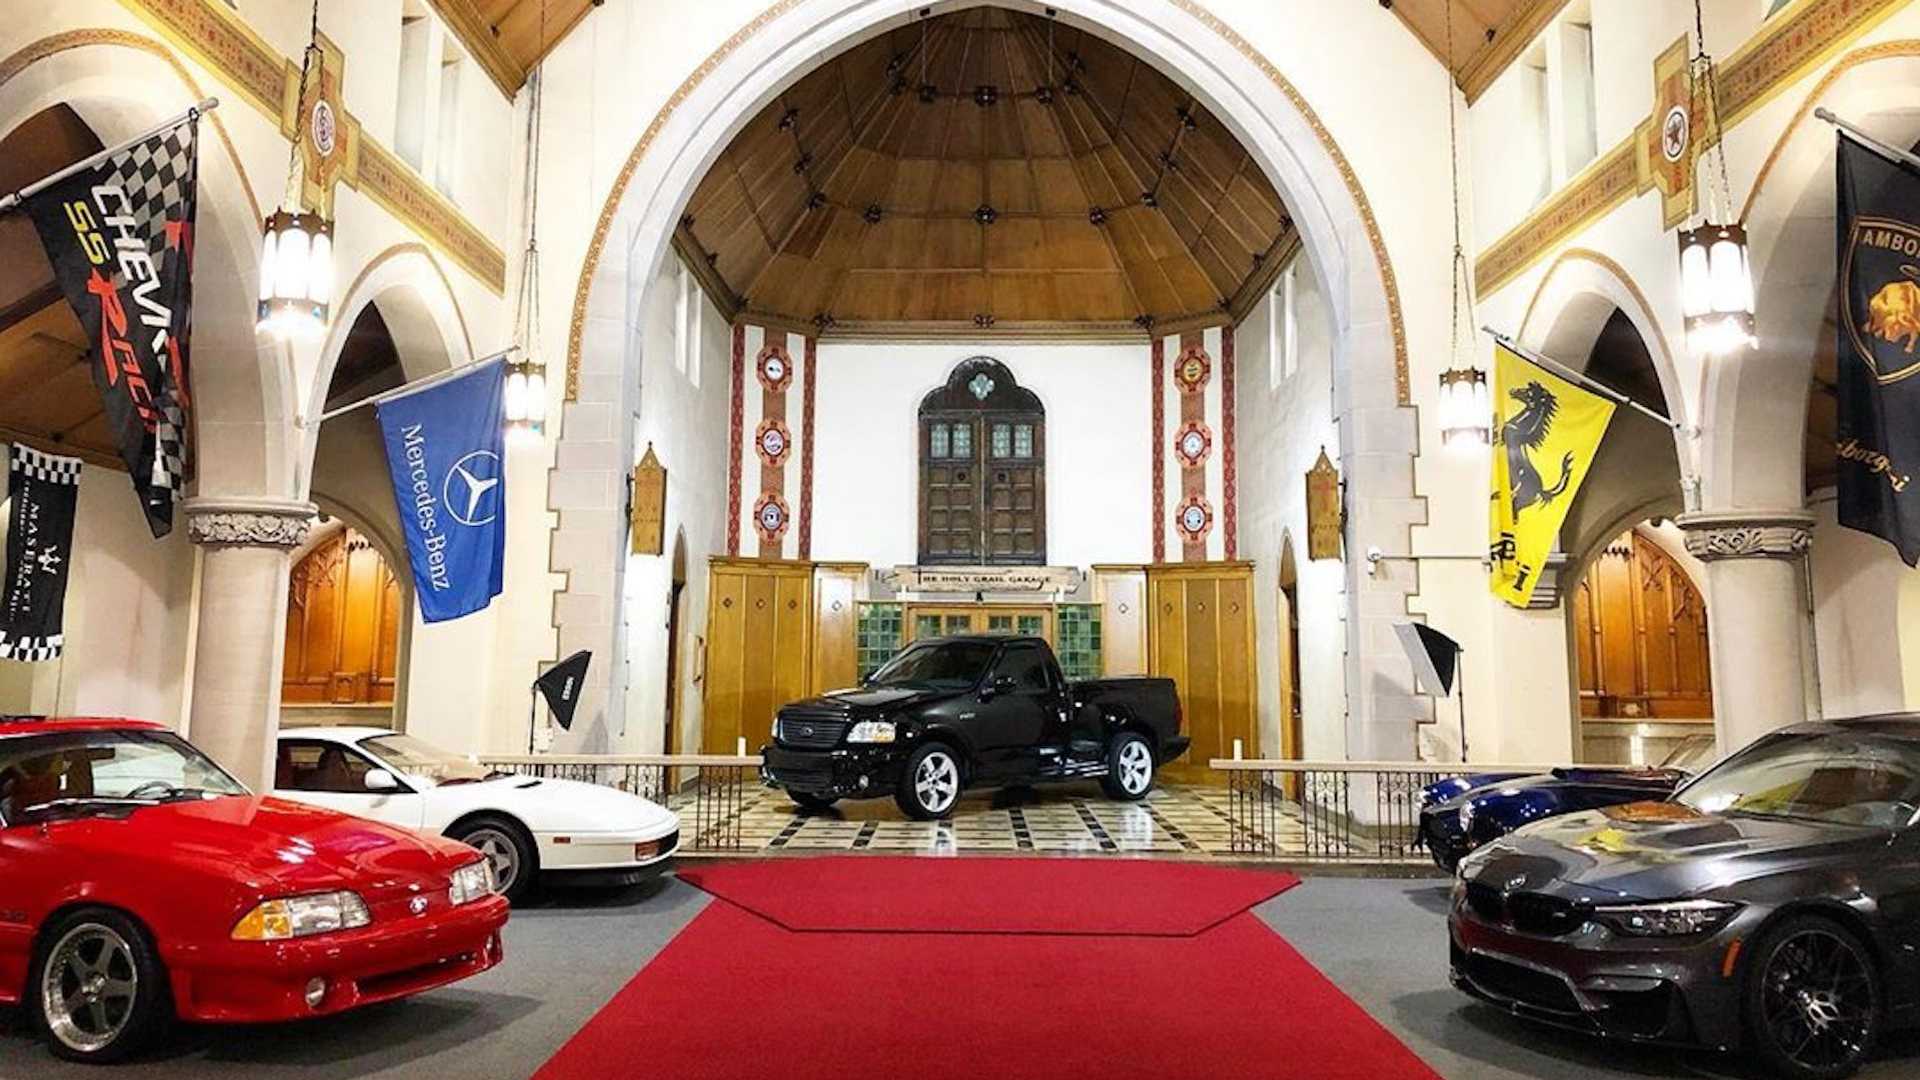 The Holy Grail Garage